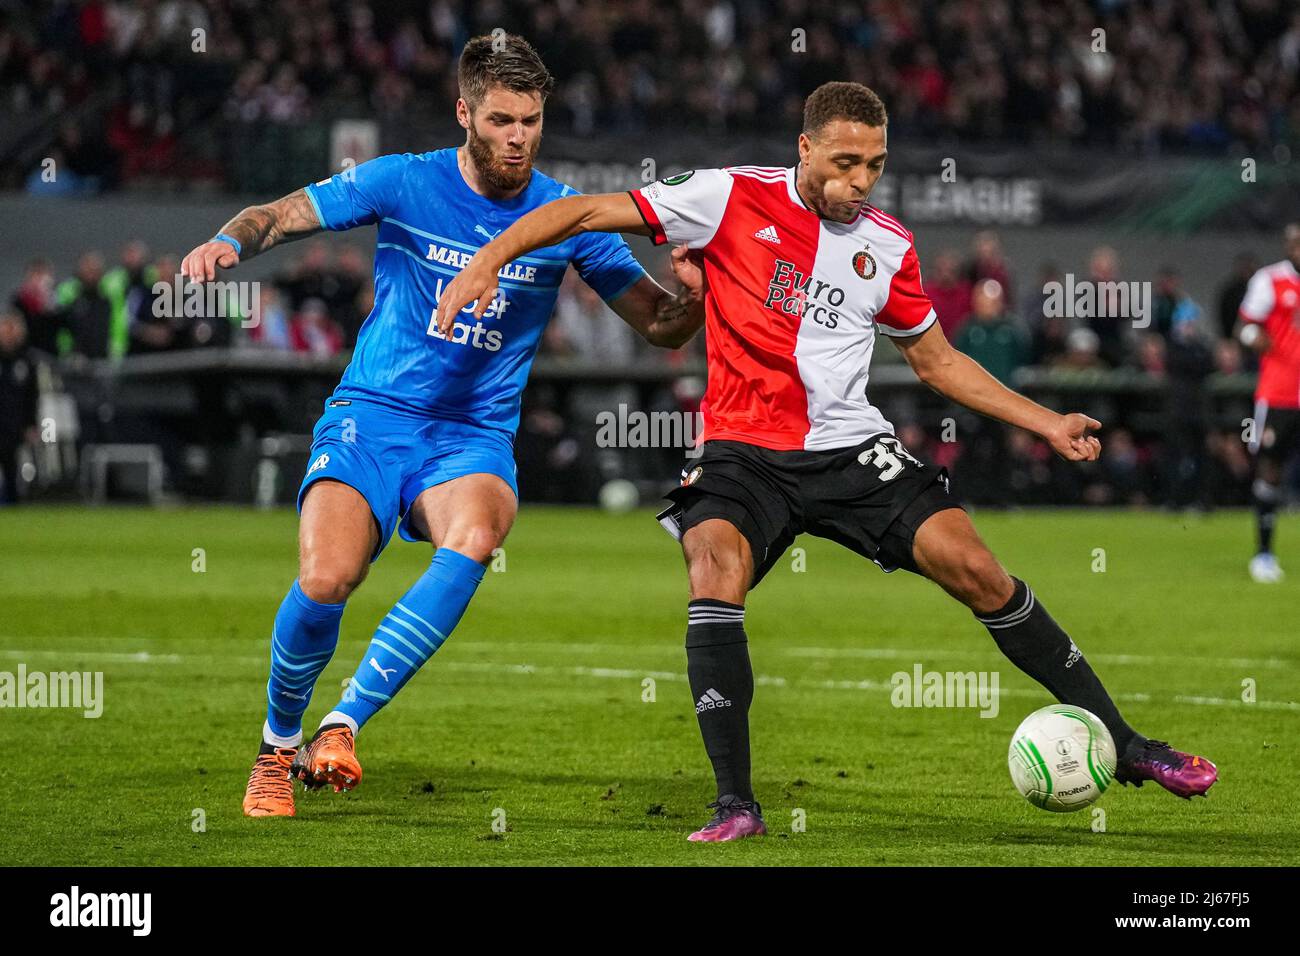 Rotterdam, Netherlands. 28th Apr, 2022. Rotterdam - Duje Caleta-Car of Olympique Marseille, Cyriel Dessers of Feyenoord during the match between Feyenoord v Olympique Marseille at Stadion Feijenoord De Kuip on 28 April 2022 in Rotterdam, The Netherlands. (Box to Box Pictures/Tom Bode) Credit: box to box pictures/Alamy Live News Stock Photo